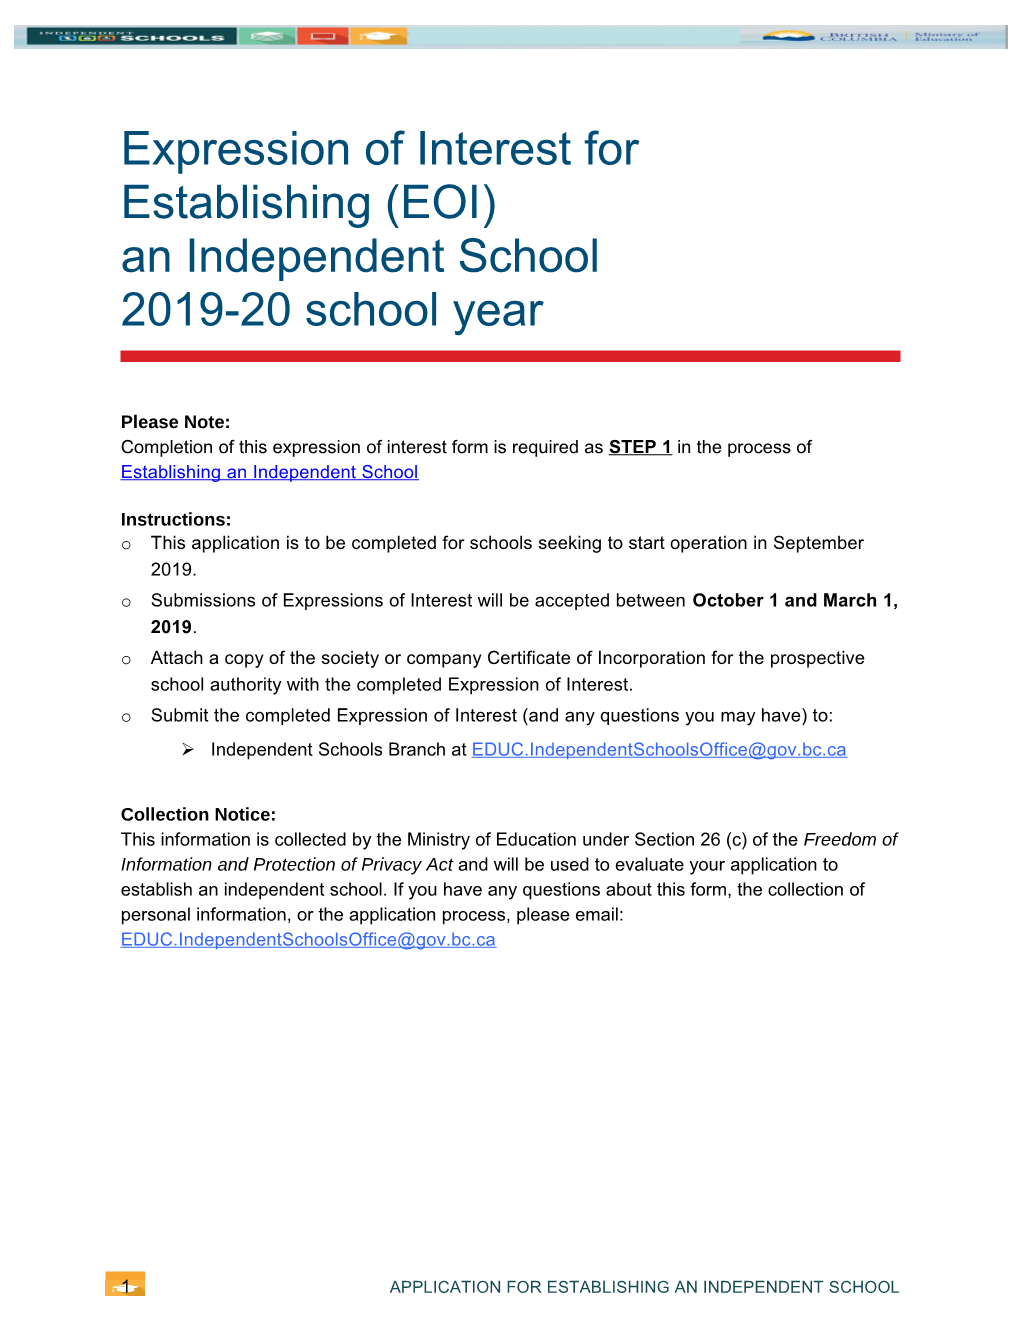 Expression of Interest for Establishing (EOI) an Independent School 2019-20 School Year